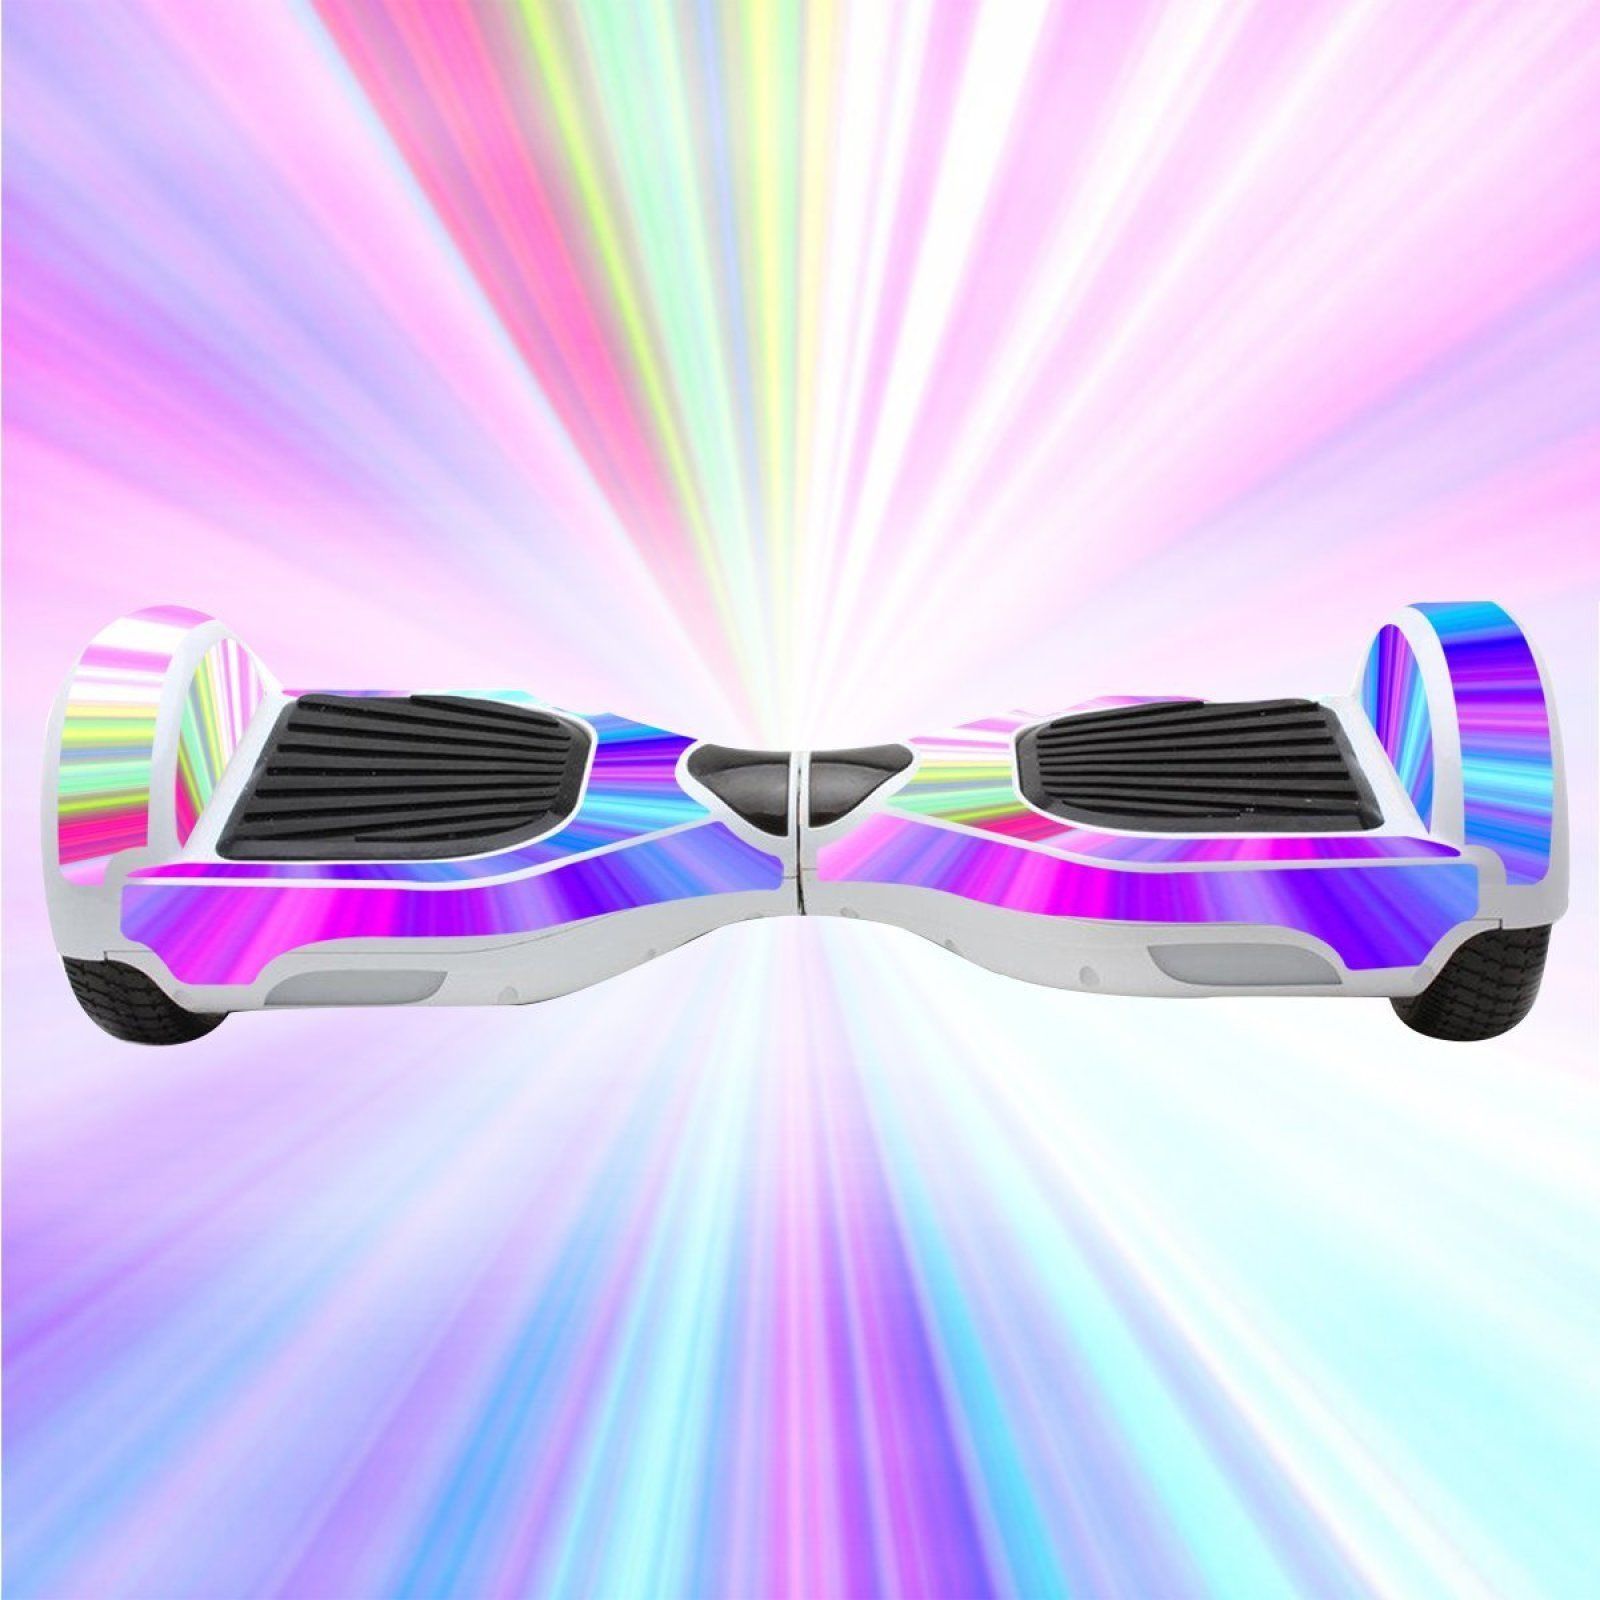 Self Balancing Hover Board Scooter Hoverboard Rainbow SKIN CASE DECAL